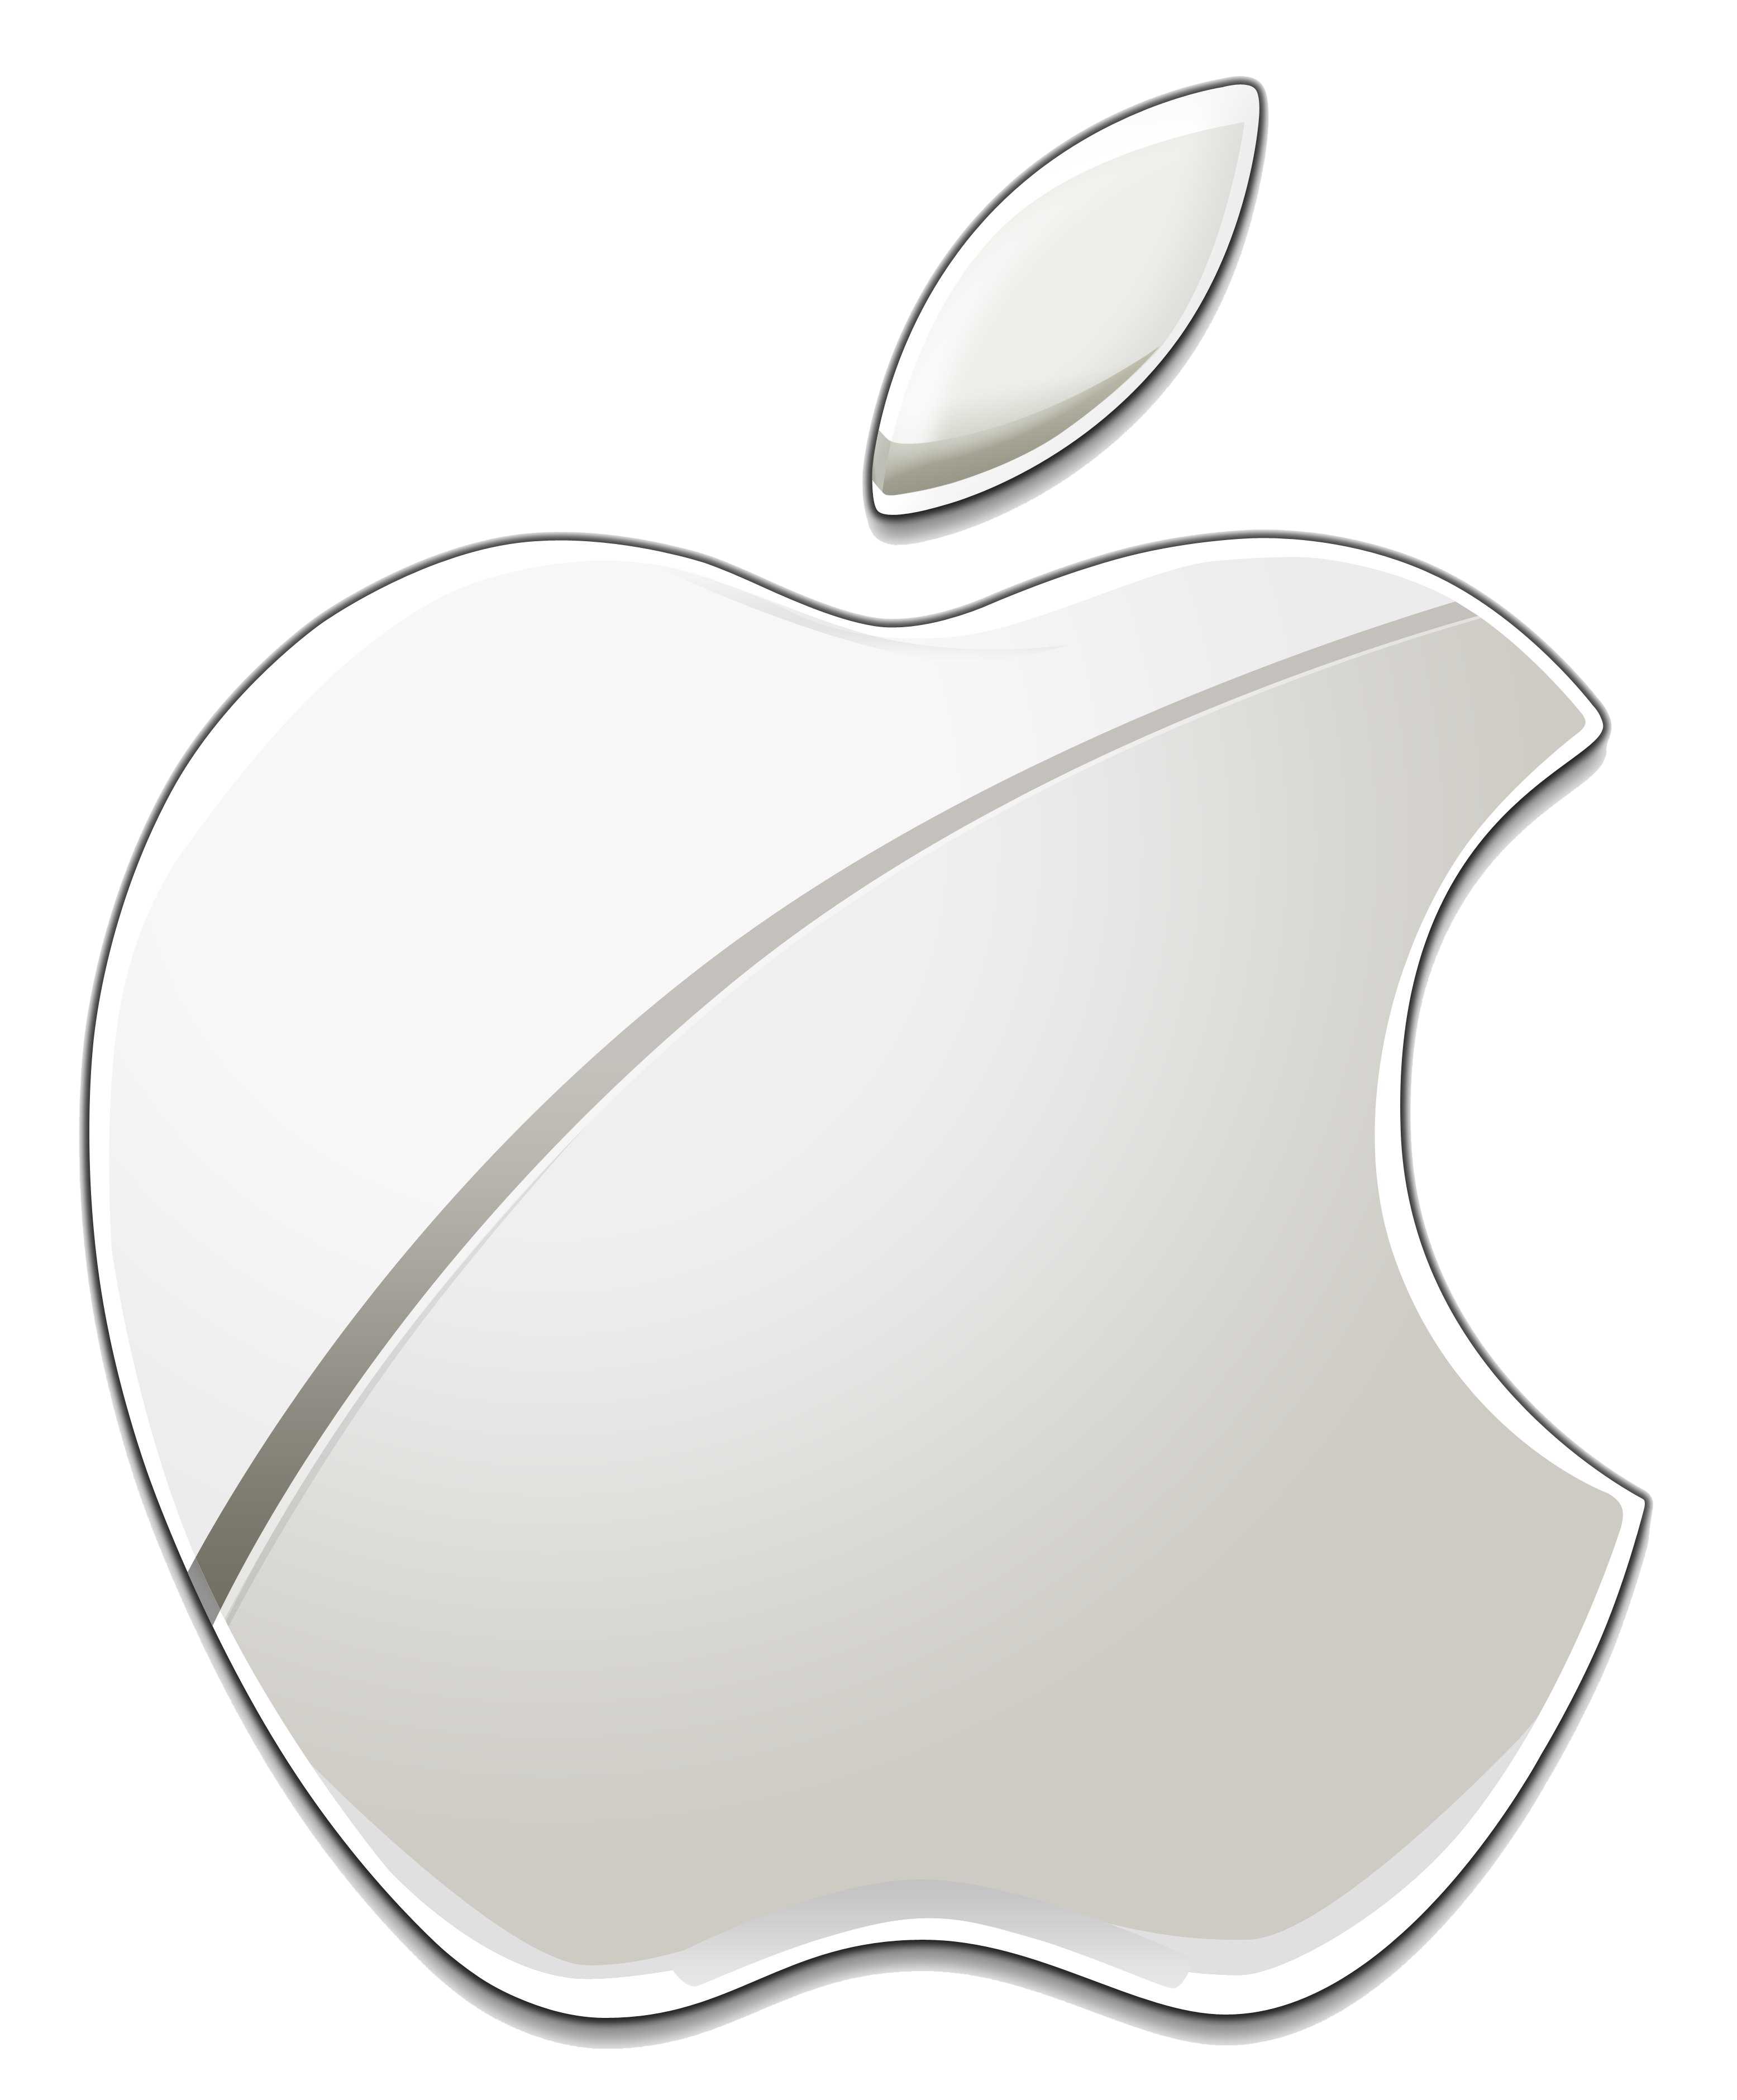 White Apple Logo PNG HD Quality - PNG Play